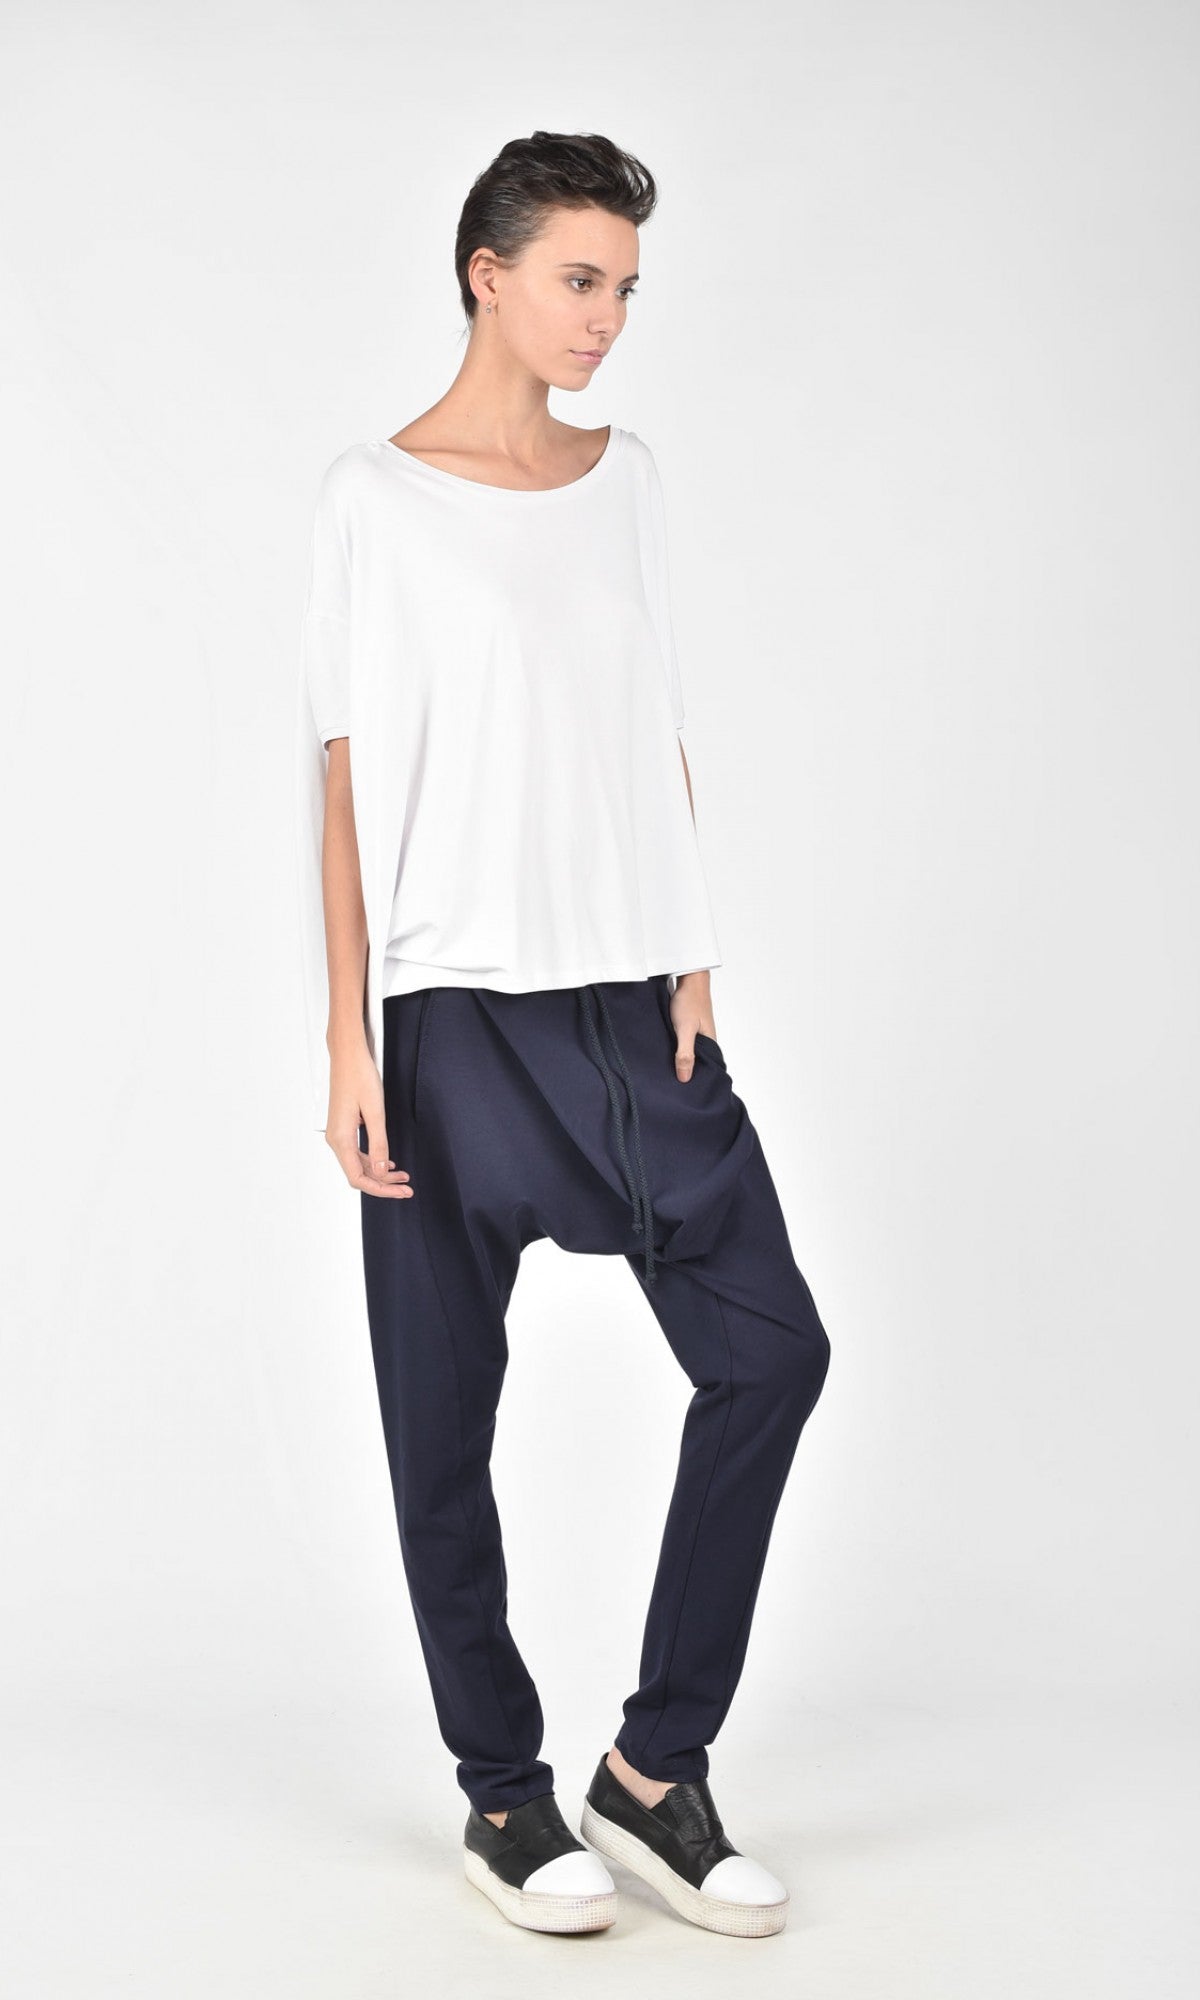 Drop Crotch Pants with Overlap Front